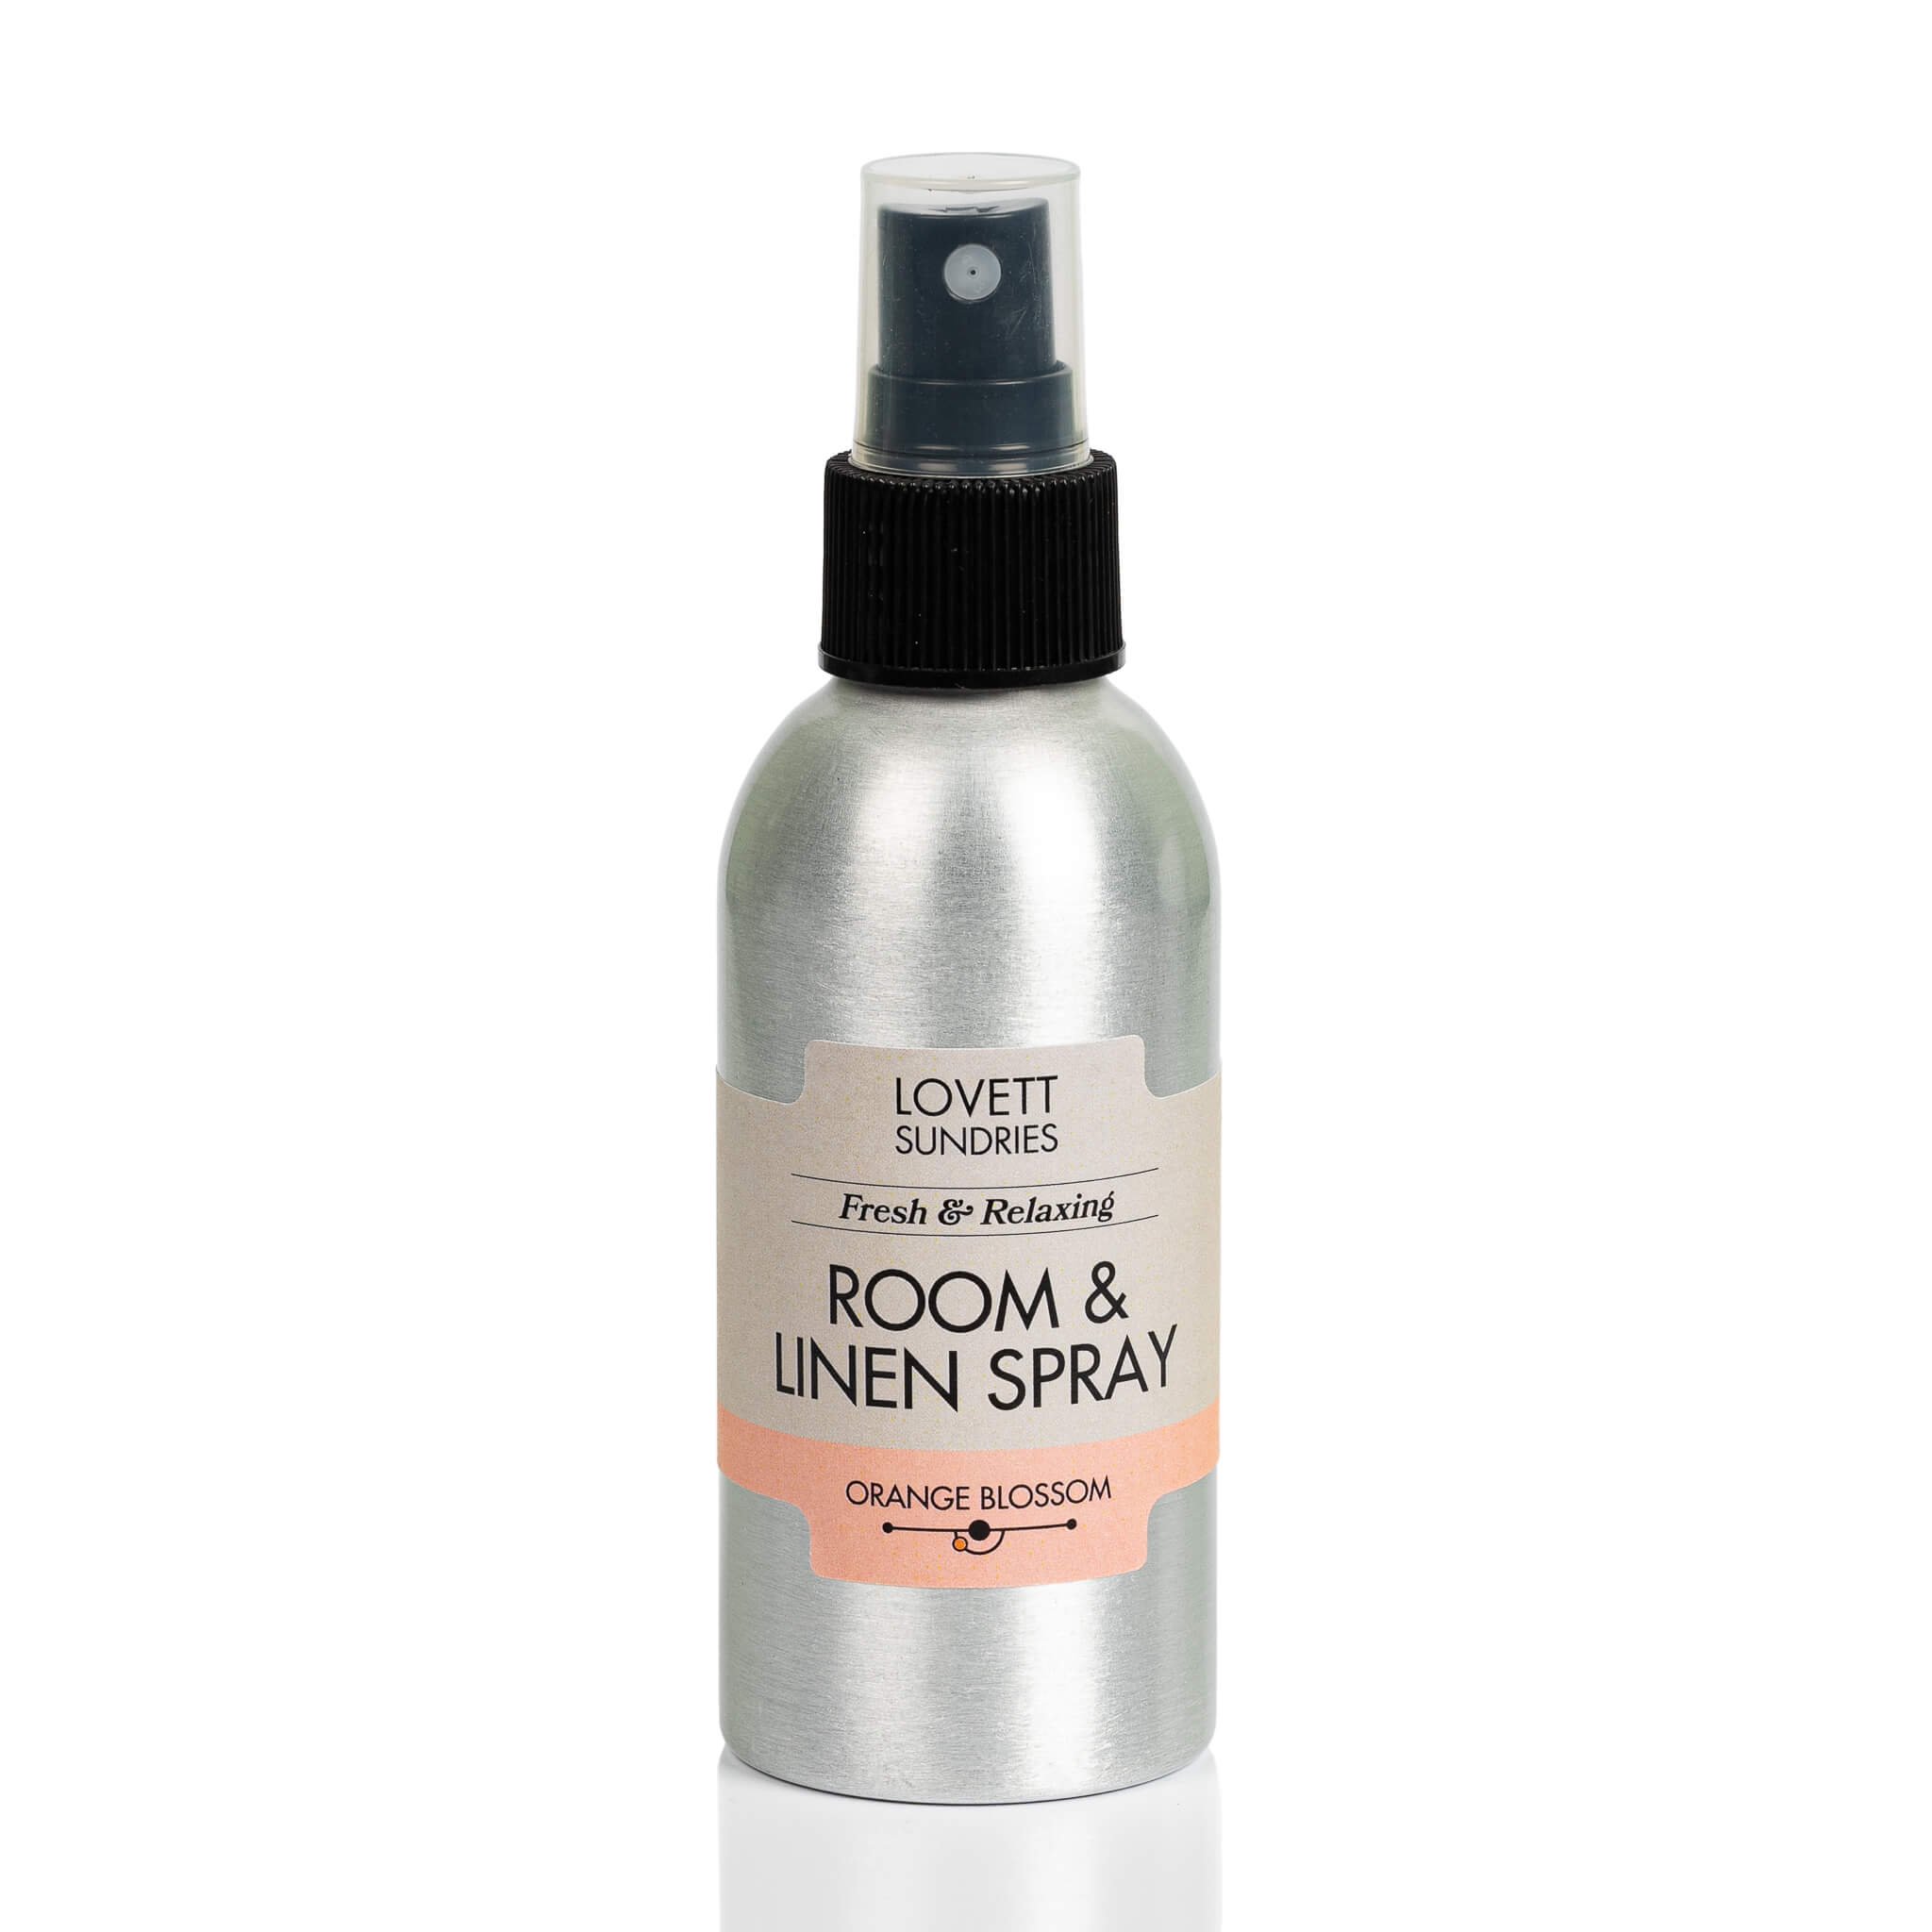 All natrual essential oil based orange blossom scented room & linen spray in a recyclable aluminum bottle with a spray top. 